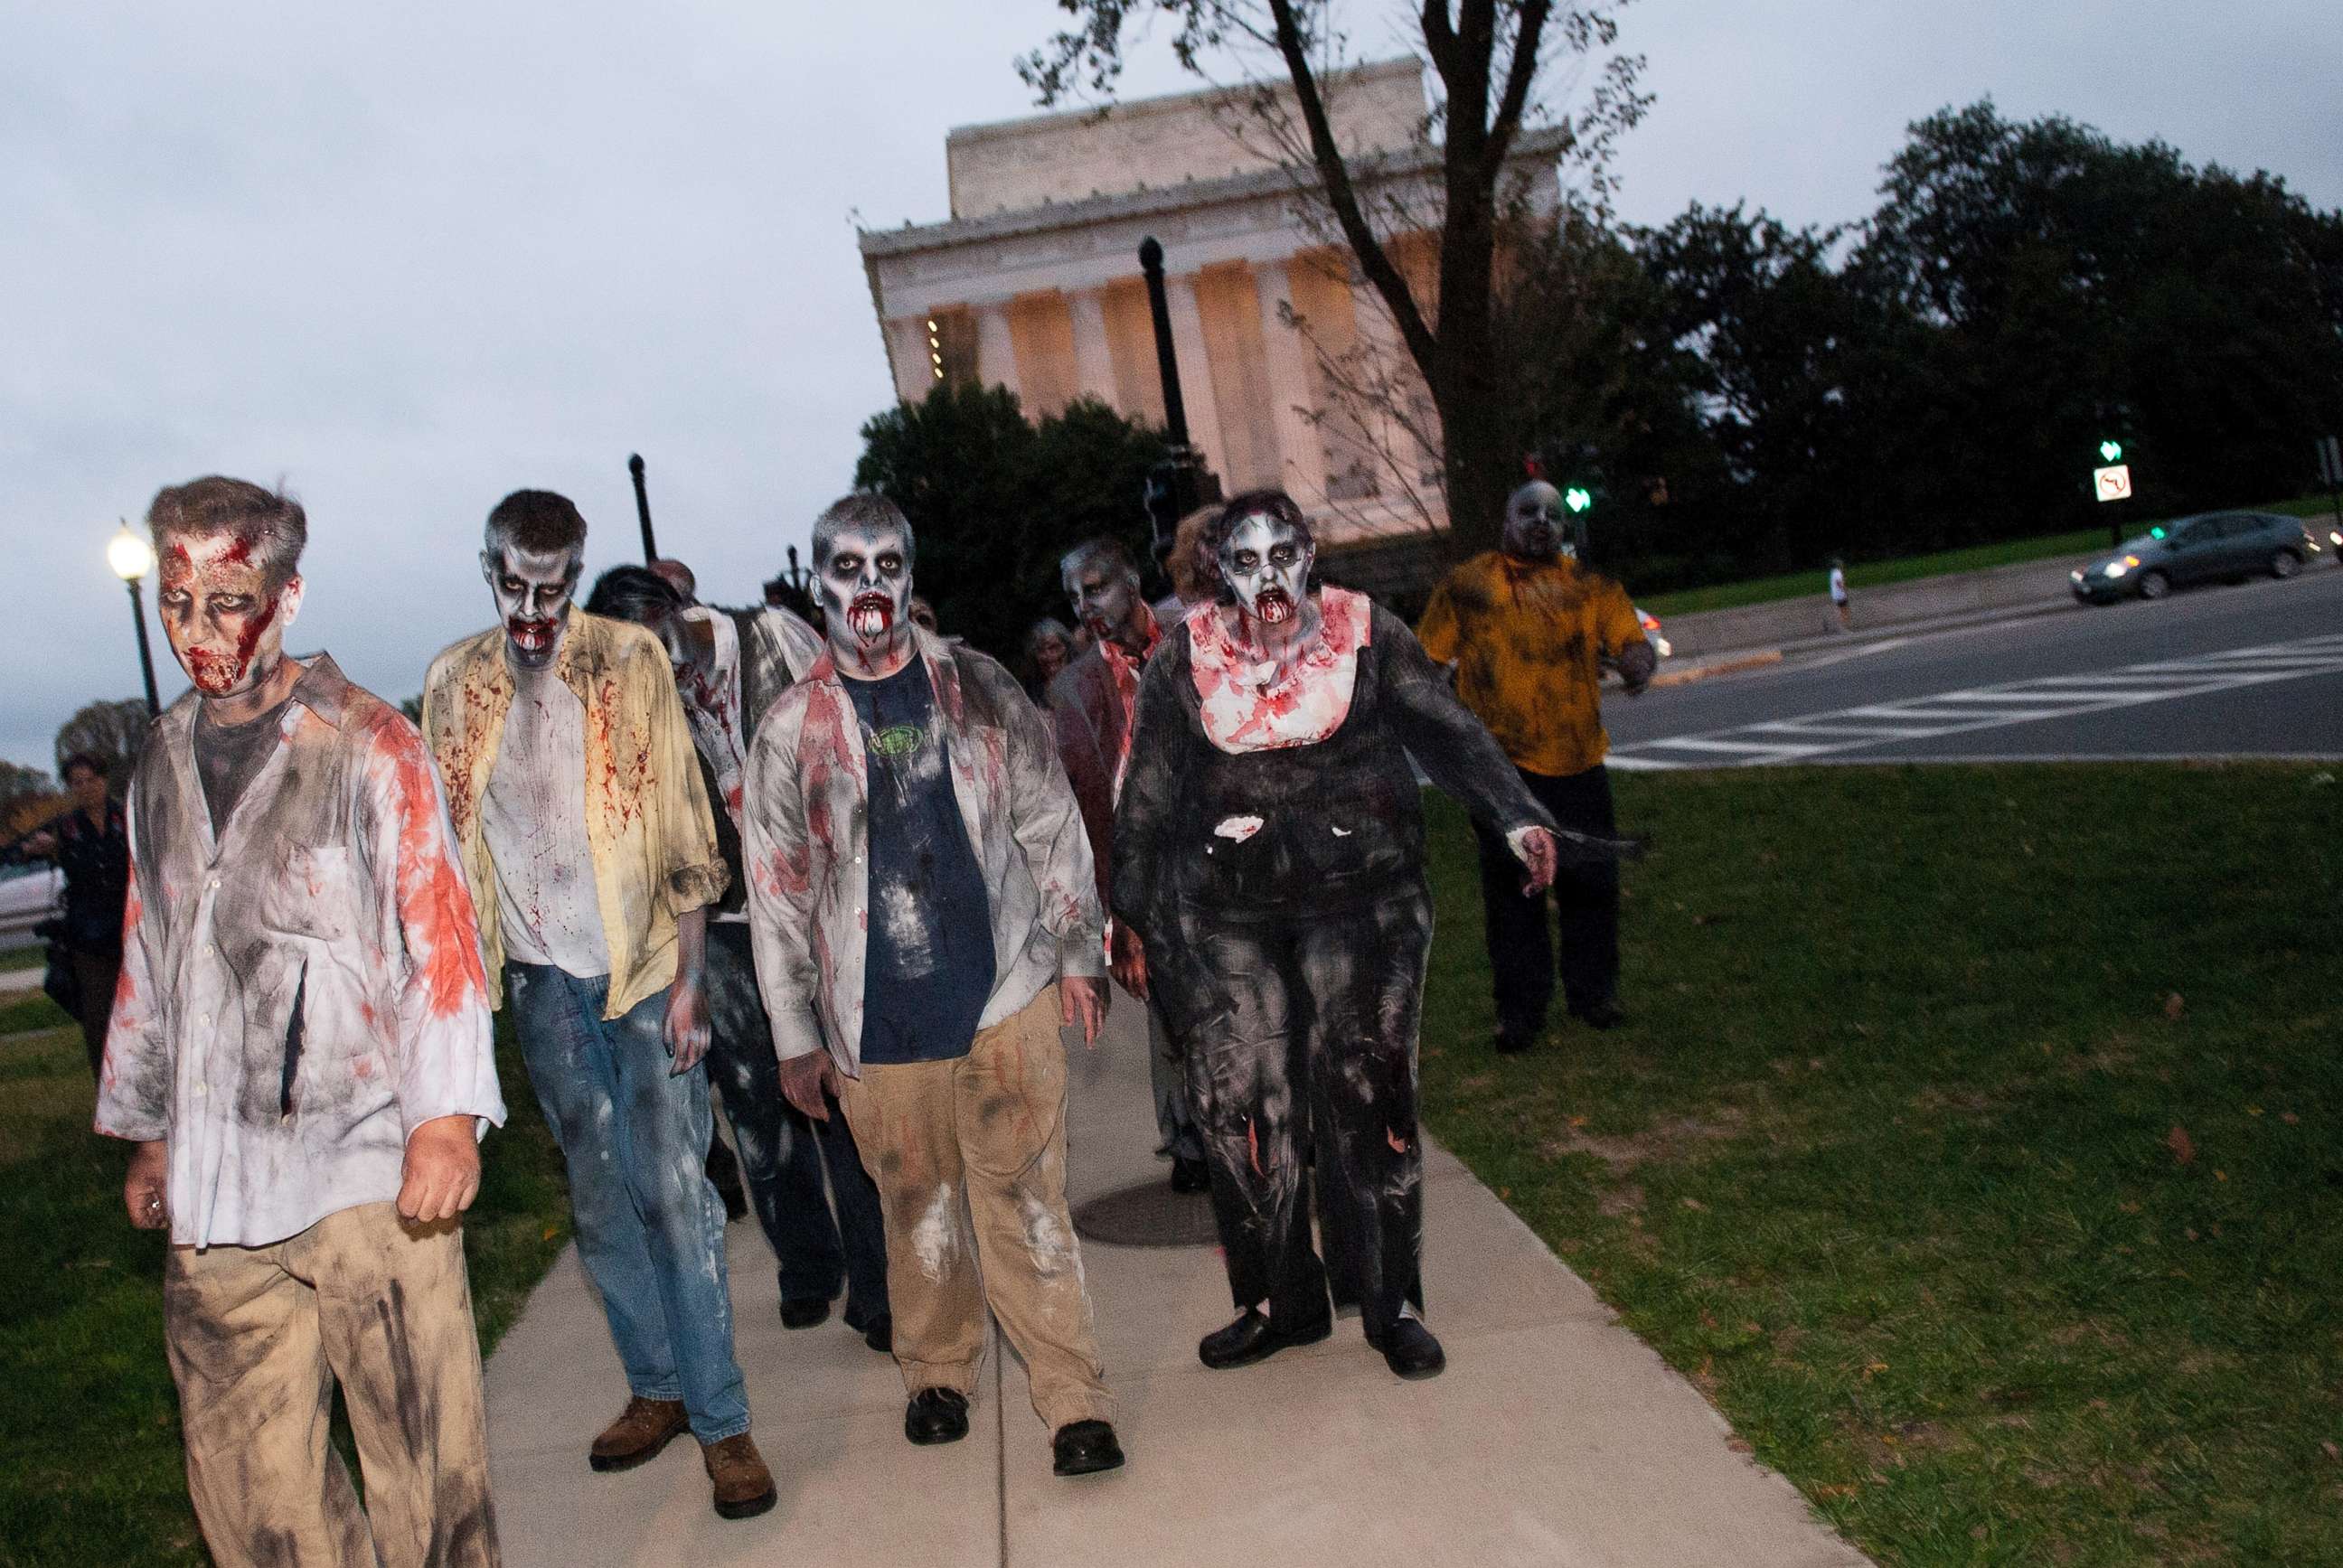 PHOTO: Zombies walk the streets during the Worldwide Zombie Invasion at Lincoln Memorial, in this file photo dated Oct. 26, 2010, in Washington.